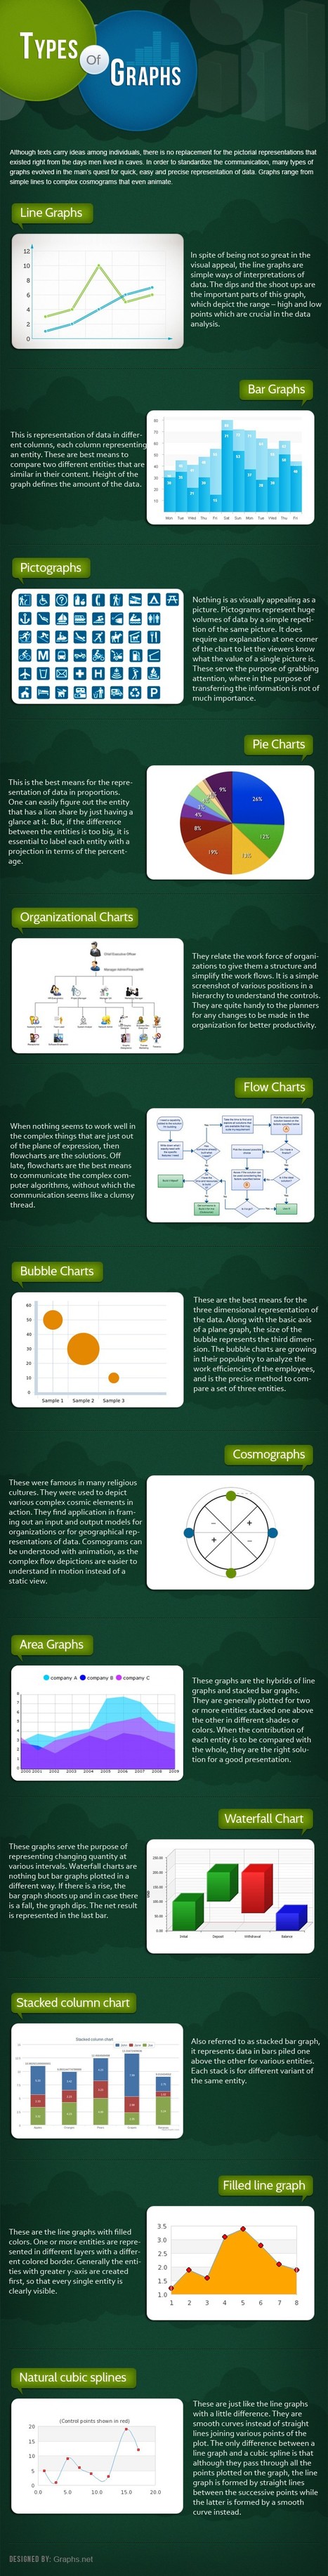 Education: What are the Types Of Graphs | All Infographics | The 21st Century | Scoop.it